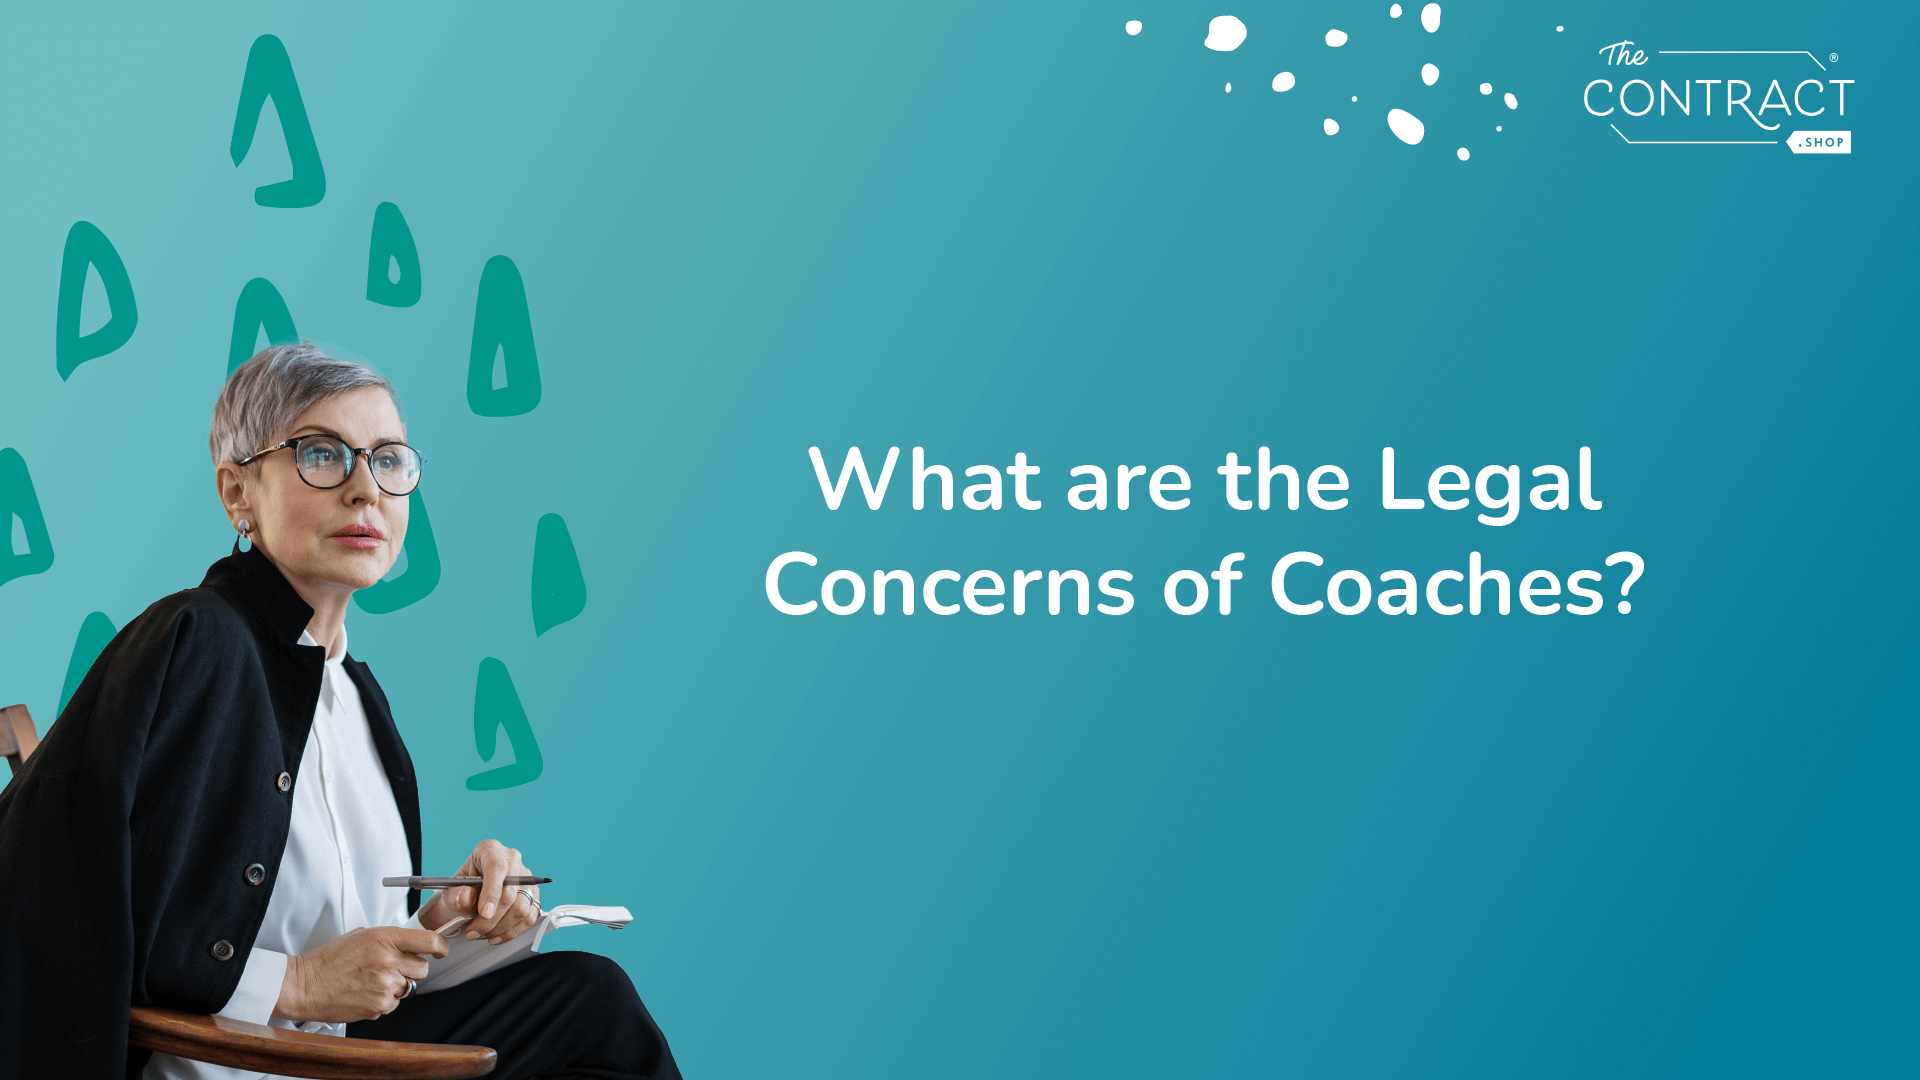 What are the Legal Concerns of Coaches?